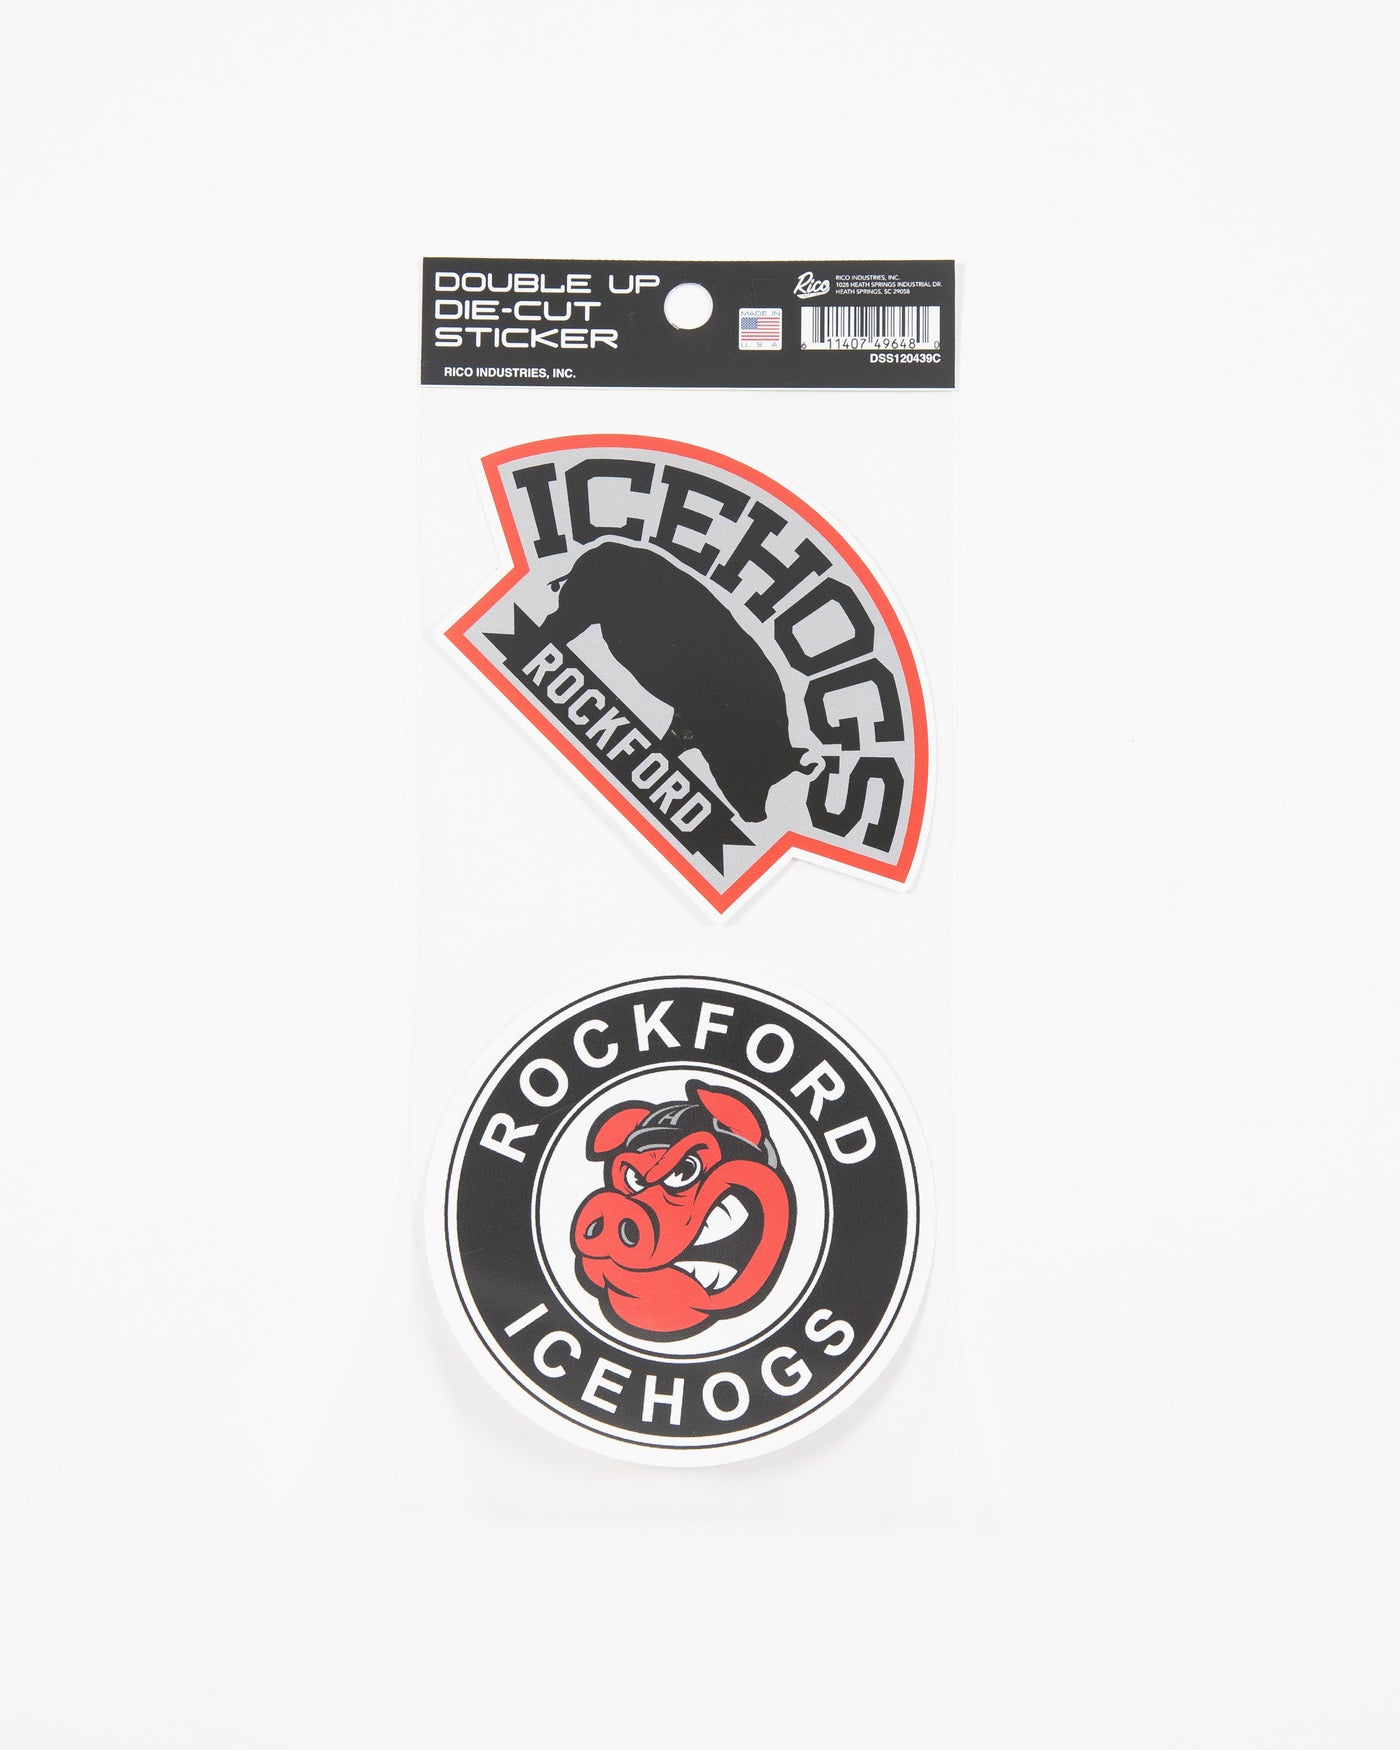 Rockford IceHogs double up die-cut stickers - front lay flat